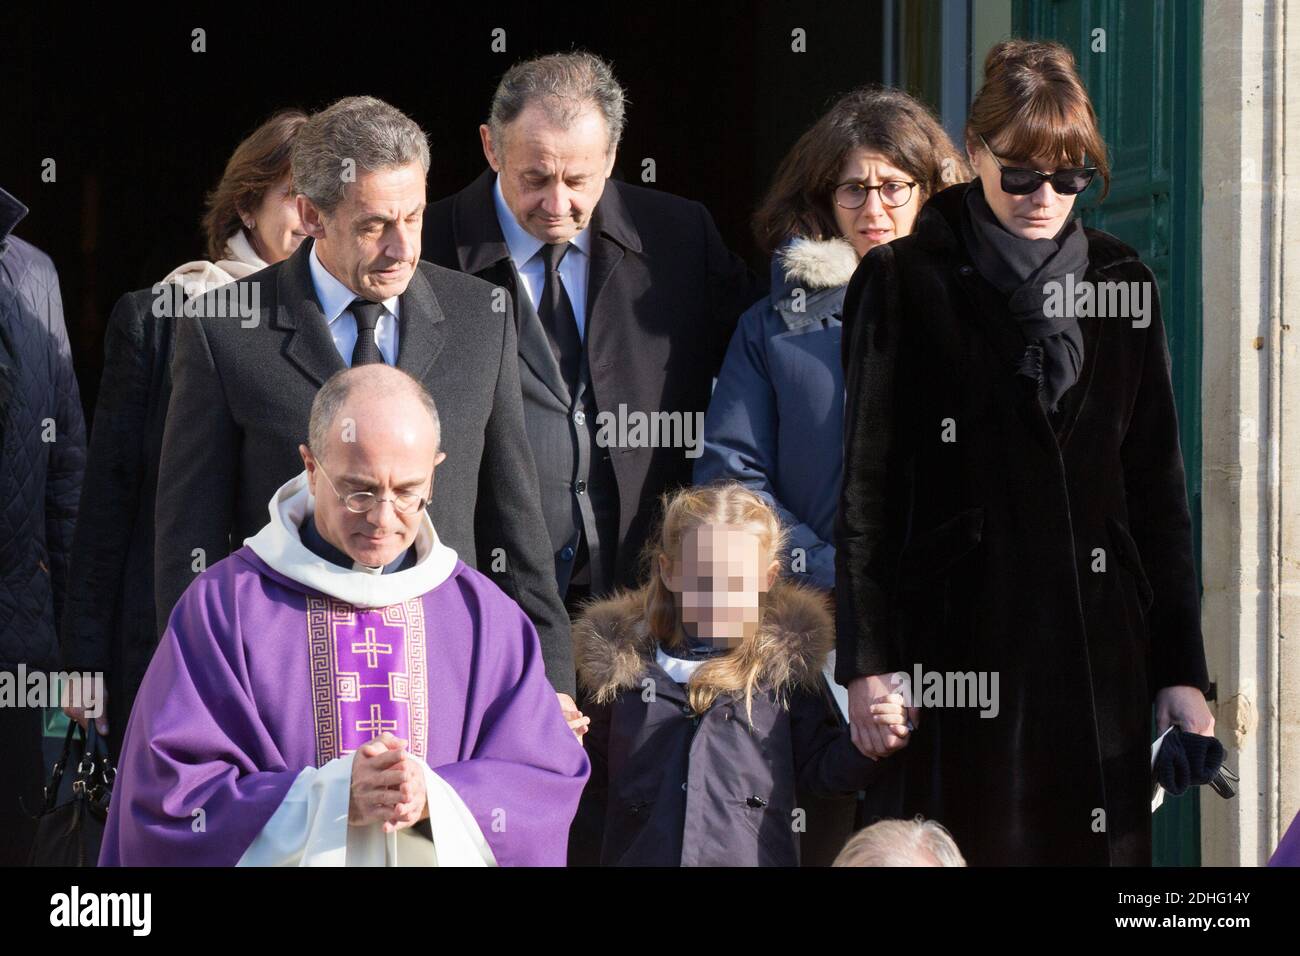 Nicolas Sarkozy, his wife Carla Bruni-Sarkozy and their daughter during the funeral of Andree Sarkozy aka Dadue, mother of Former French President Nicolas Sarkozy, at Saint-Jean-Baptiste church in Neuilly-Sur-Seine, France on December 18, 2017. Photo by ABACAPRESS.COM Stock Photo